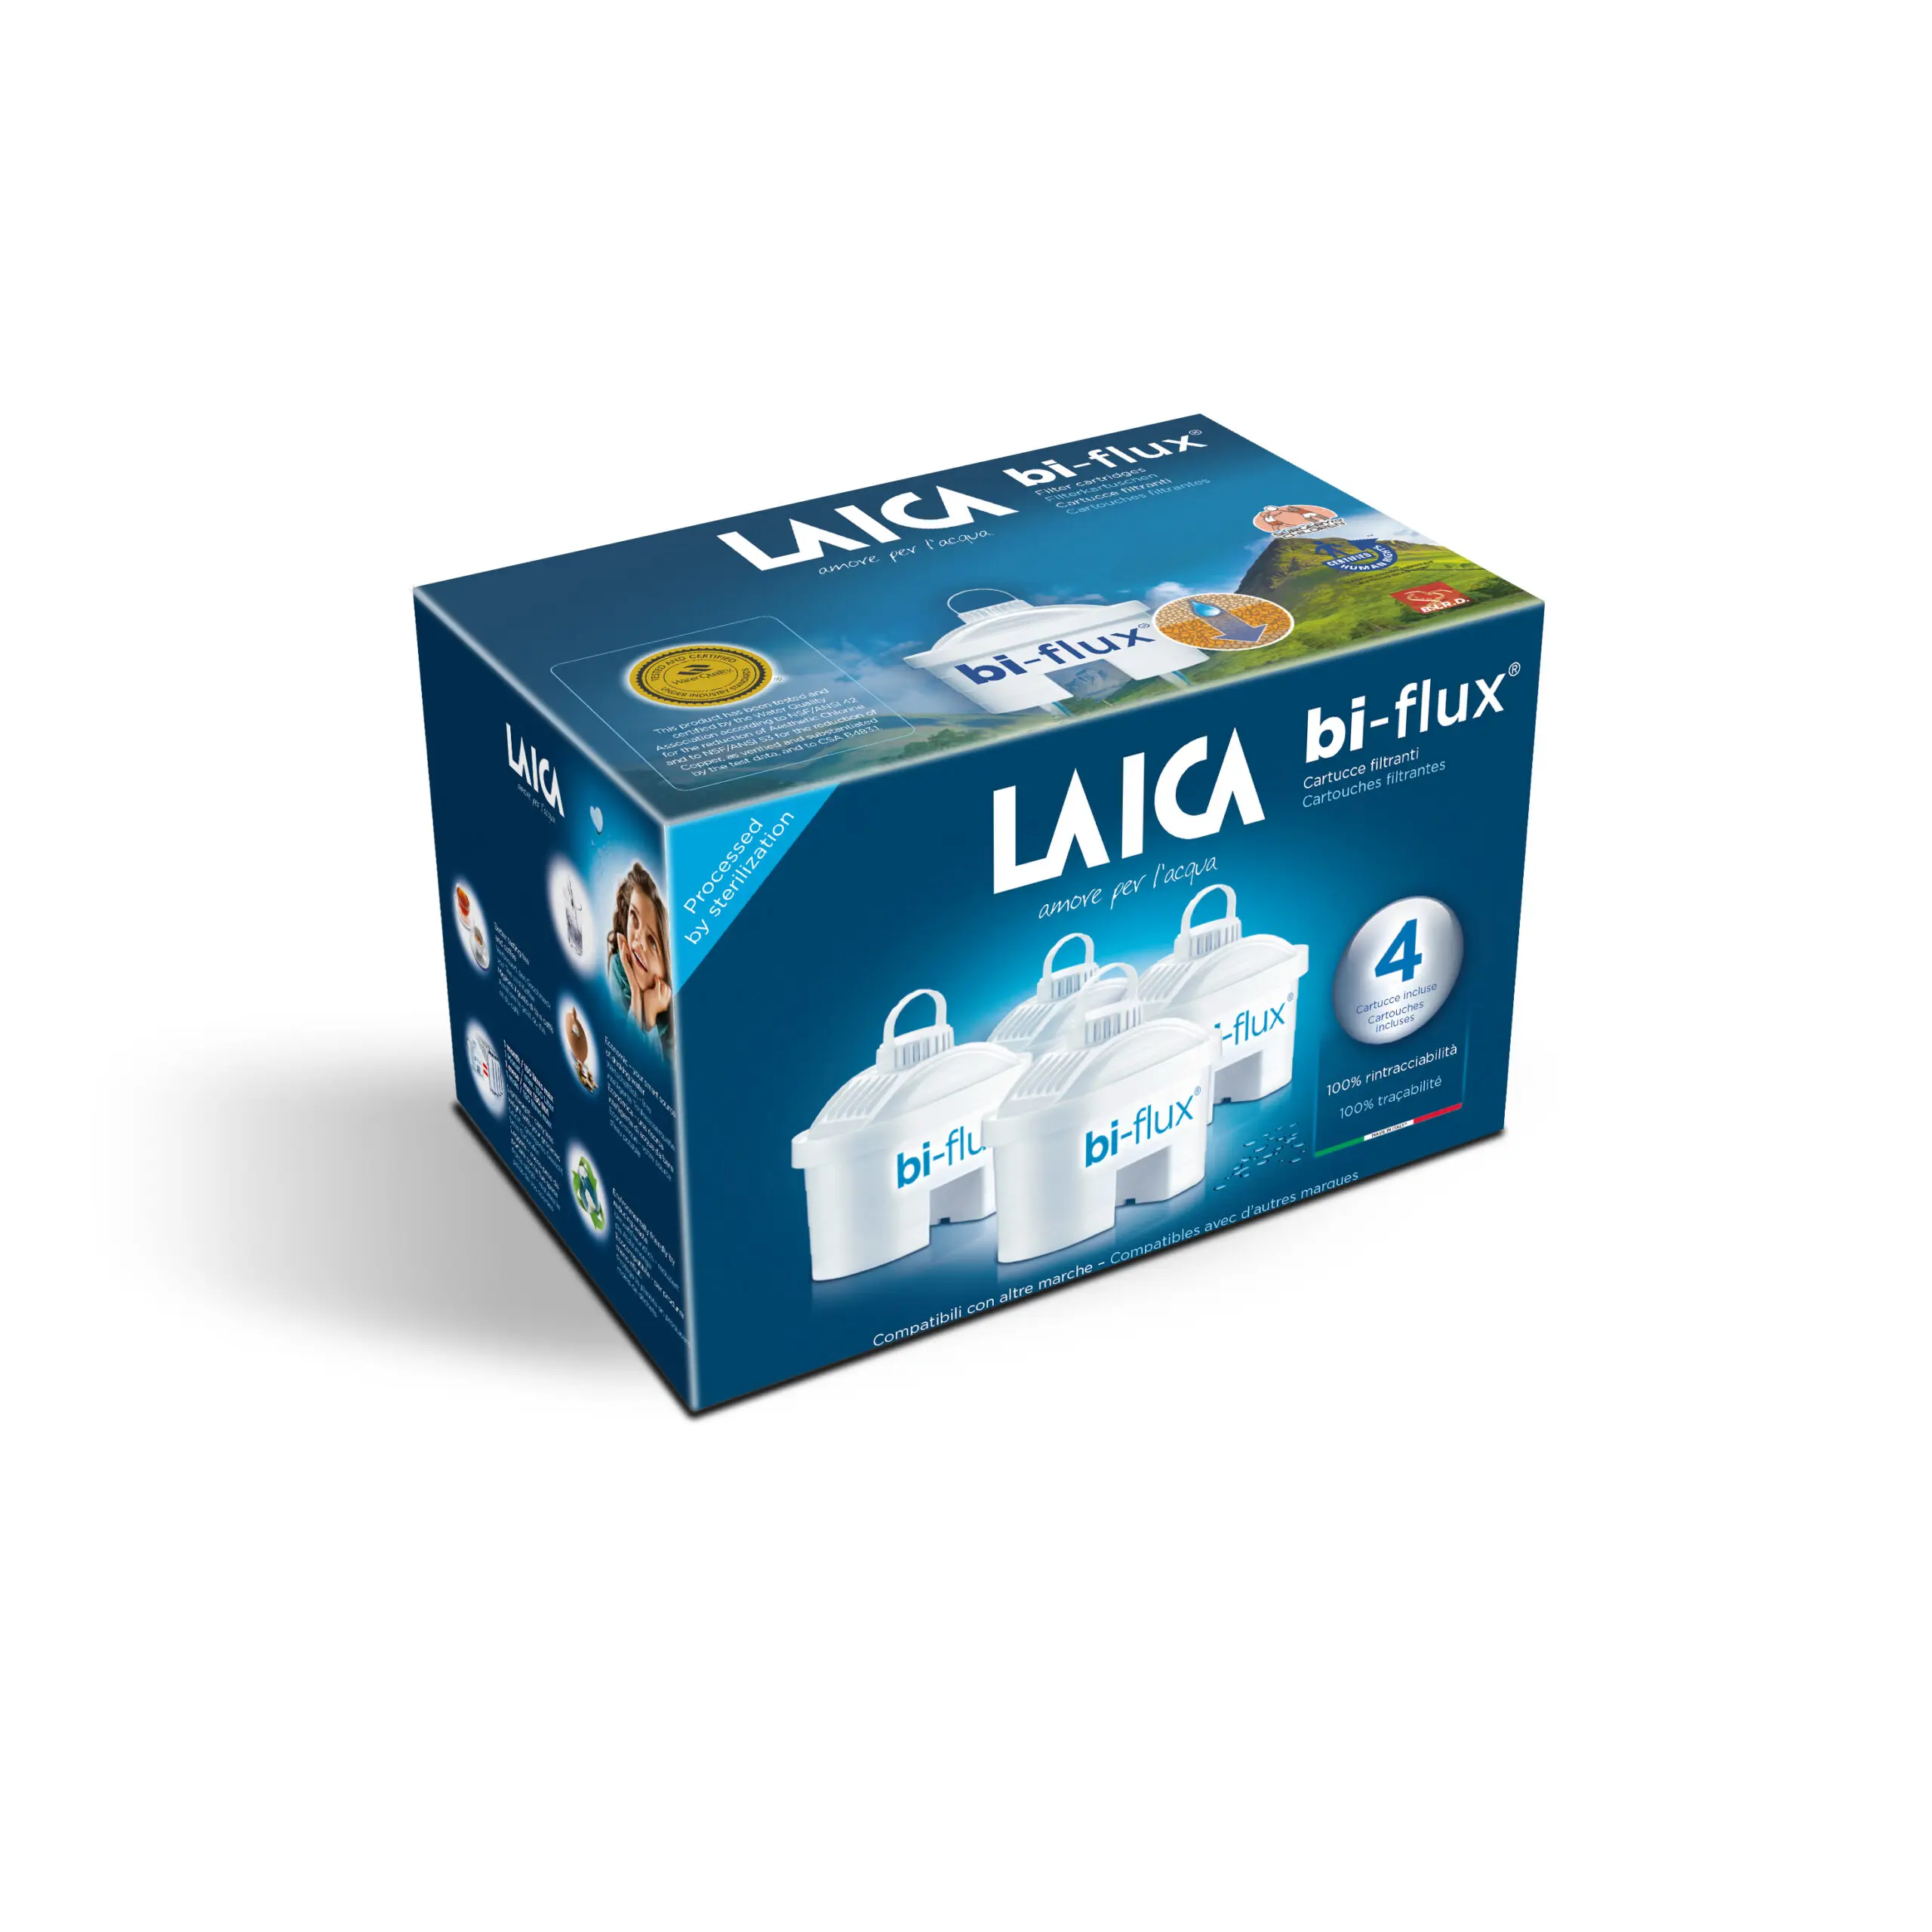 Original LAICA 1, 2, 3, 4 and 6 Pcs bi-Flux: improve the taste of water,  reduce lime and chlorine, compatible with Brita jugs